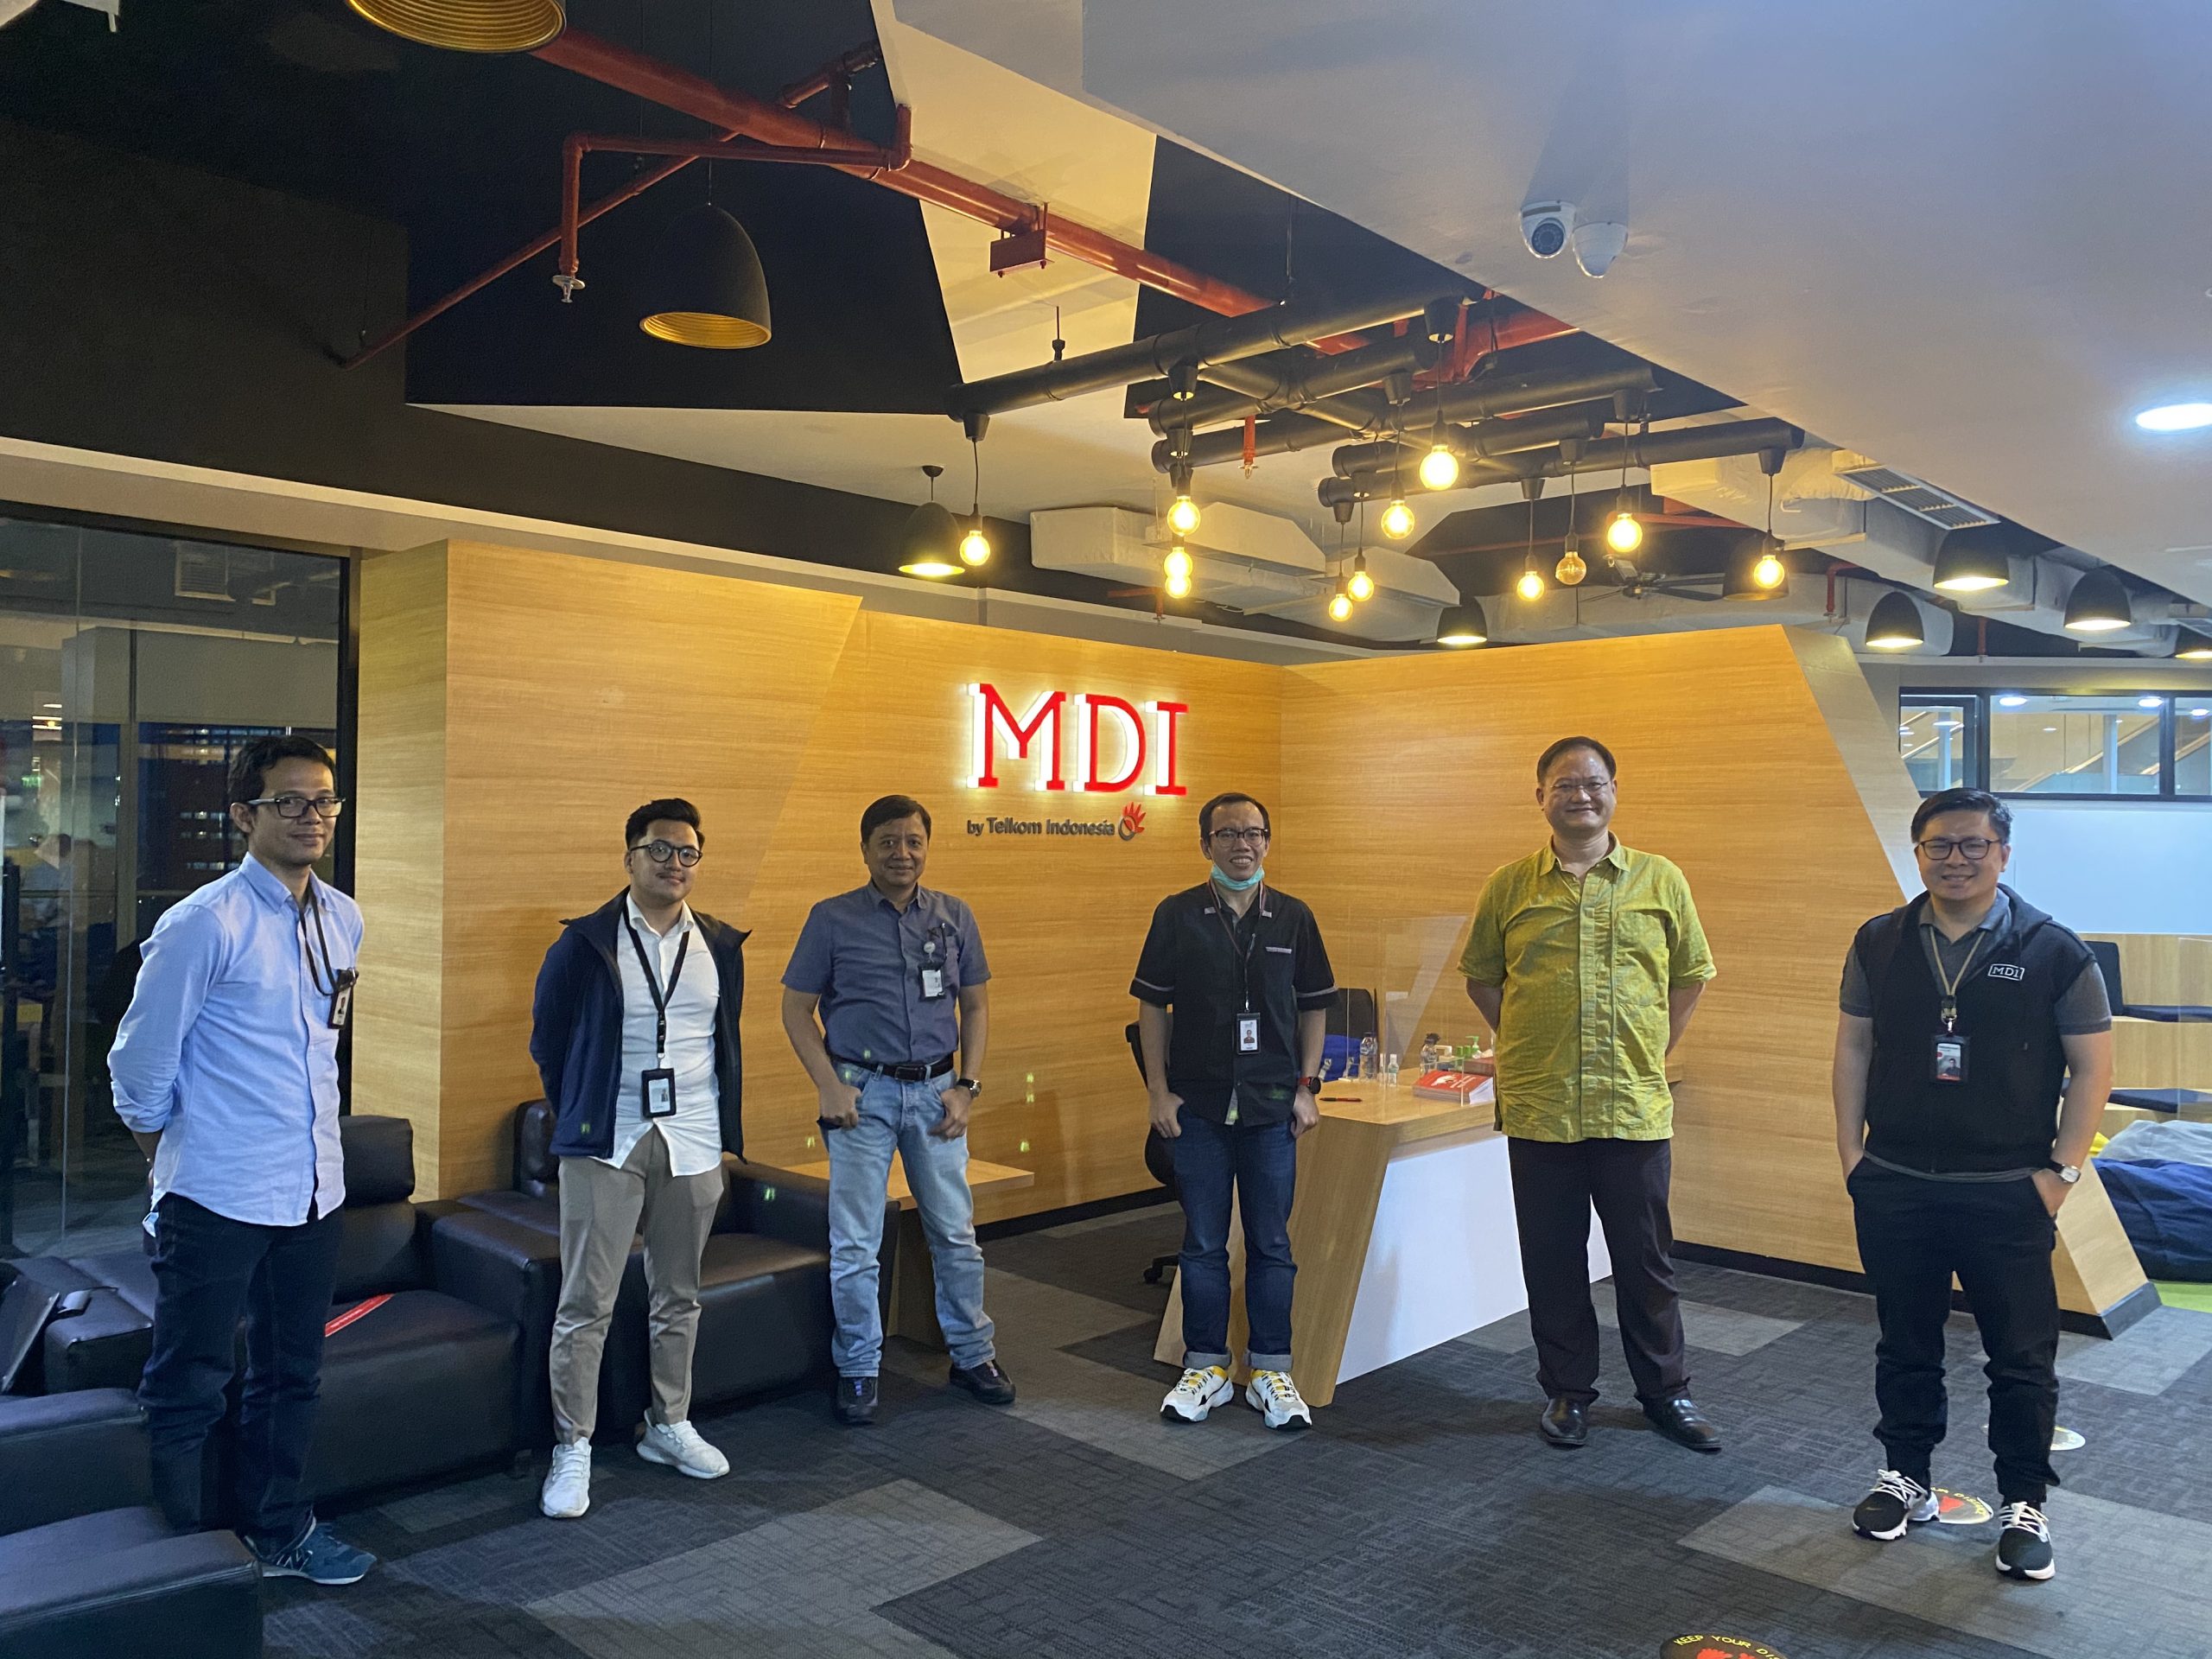 MDI Ventures to invest up to USD 30 million in startups to boost digitization of Indonesia’s state-owned enterprises, CEO says